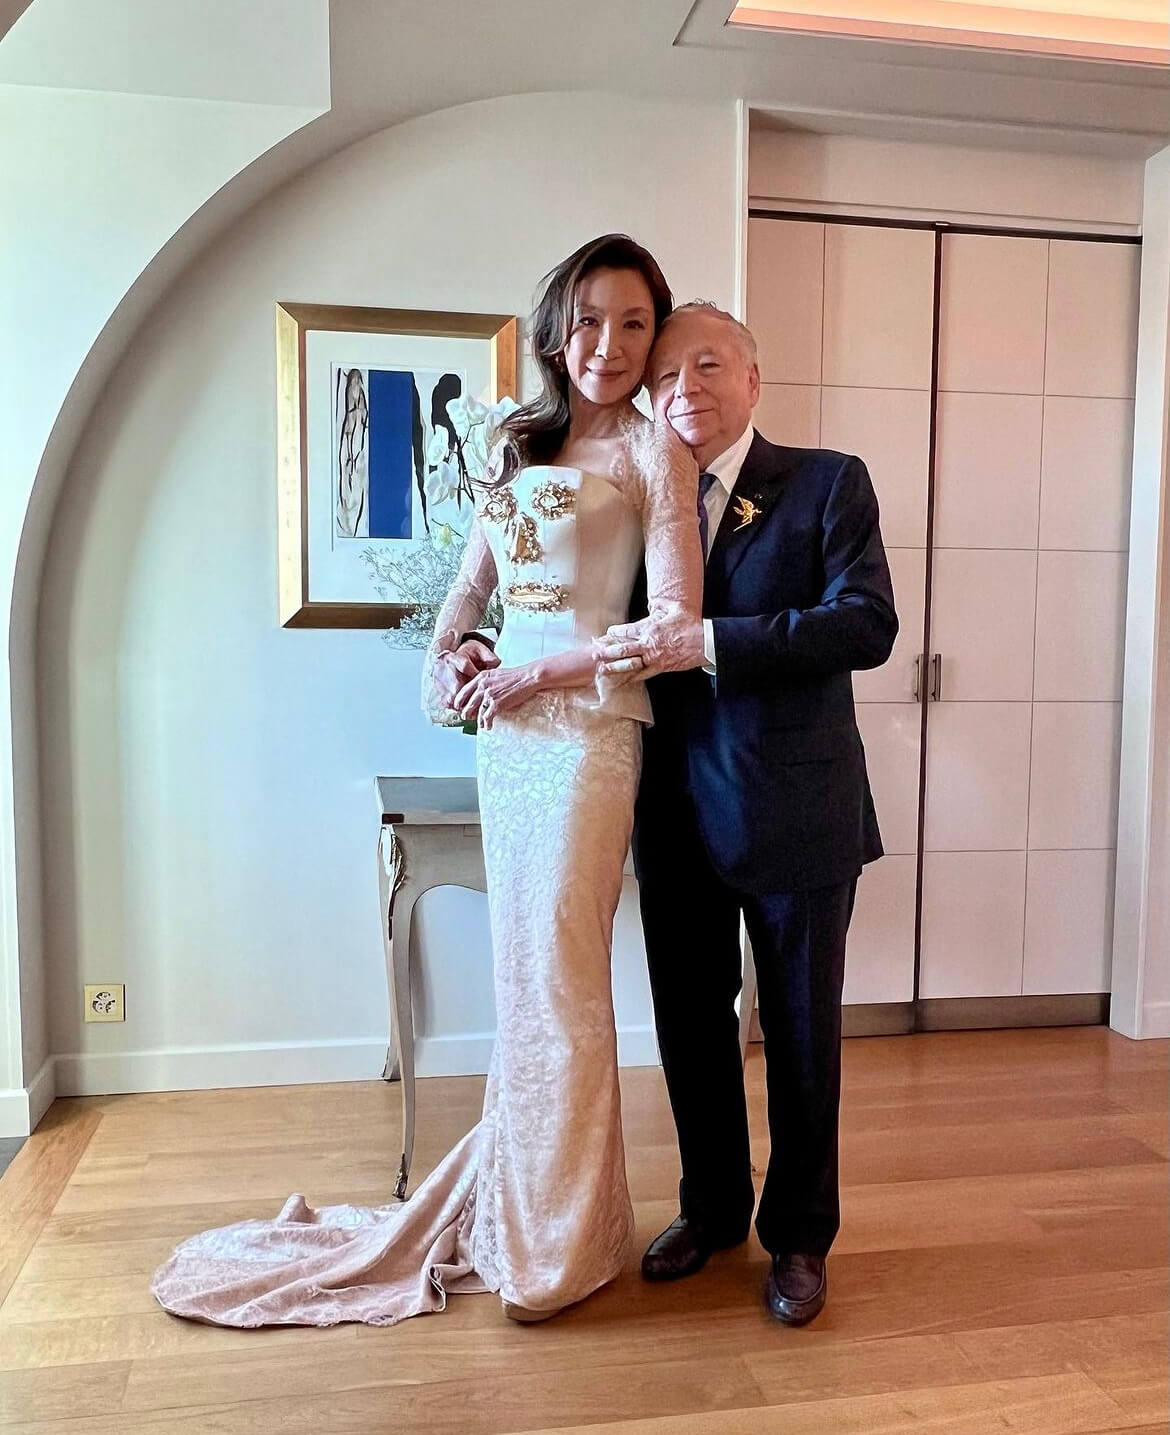 Michelle Yeoh and Jean Todt